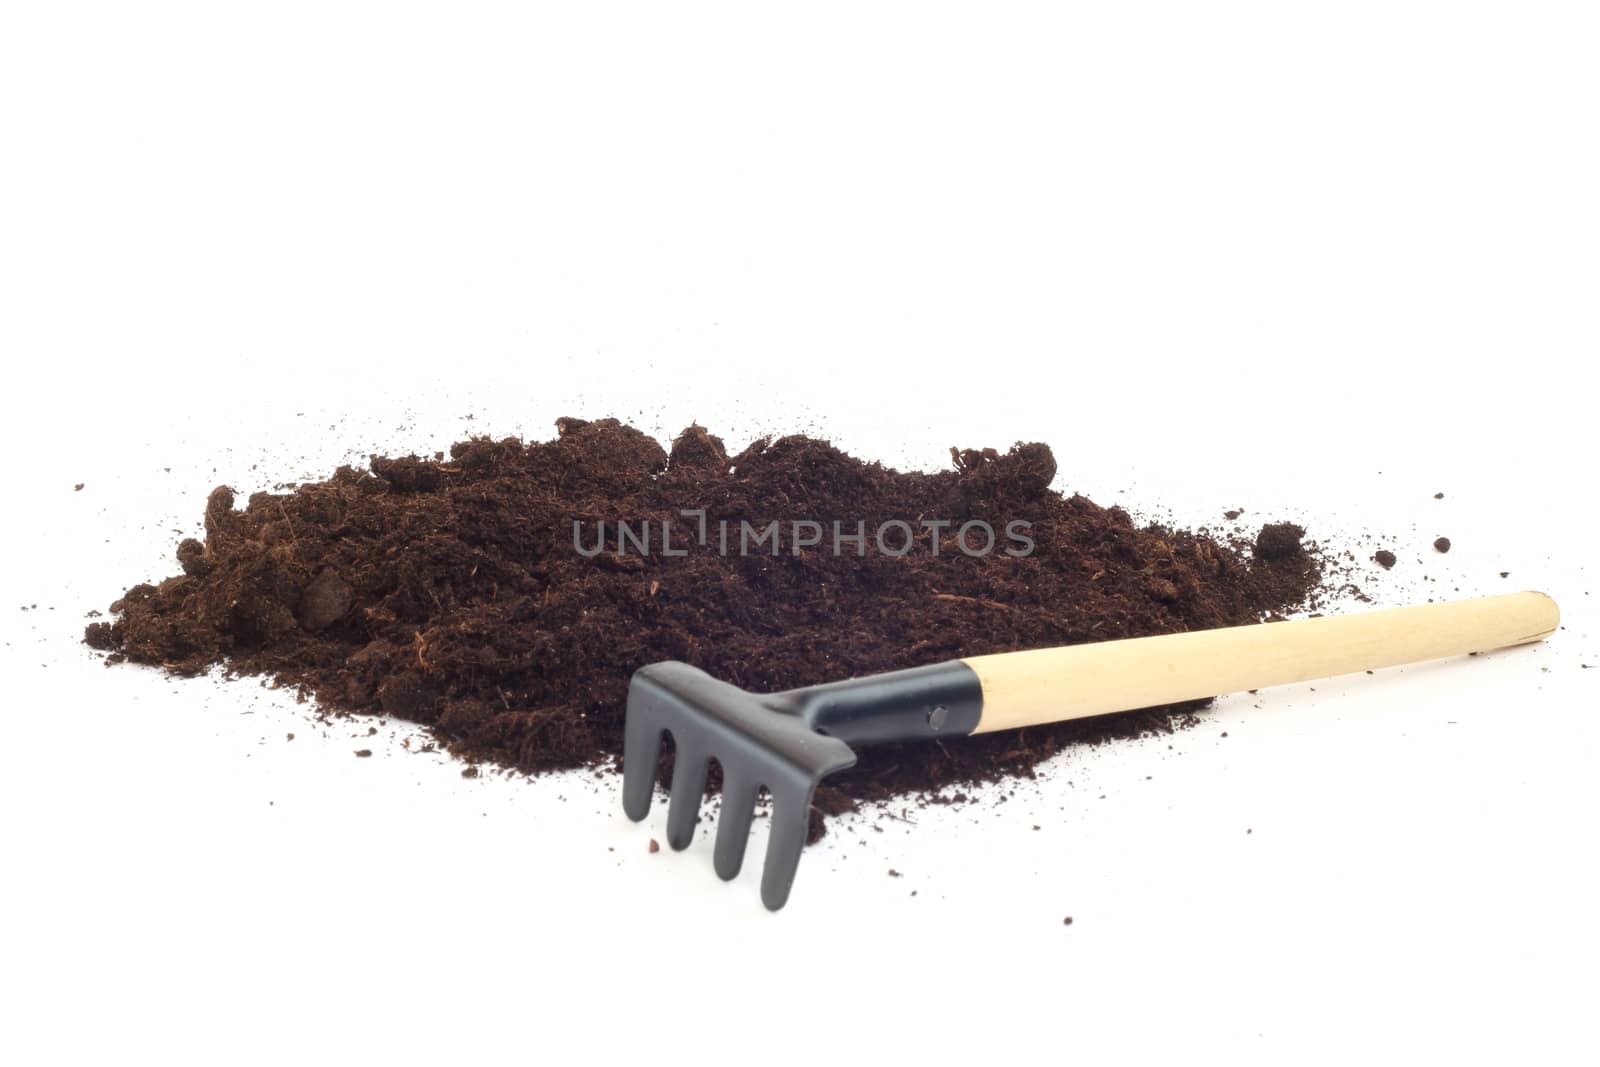 Rake and dirt isolated on white by destillat